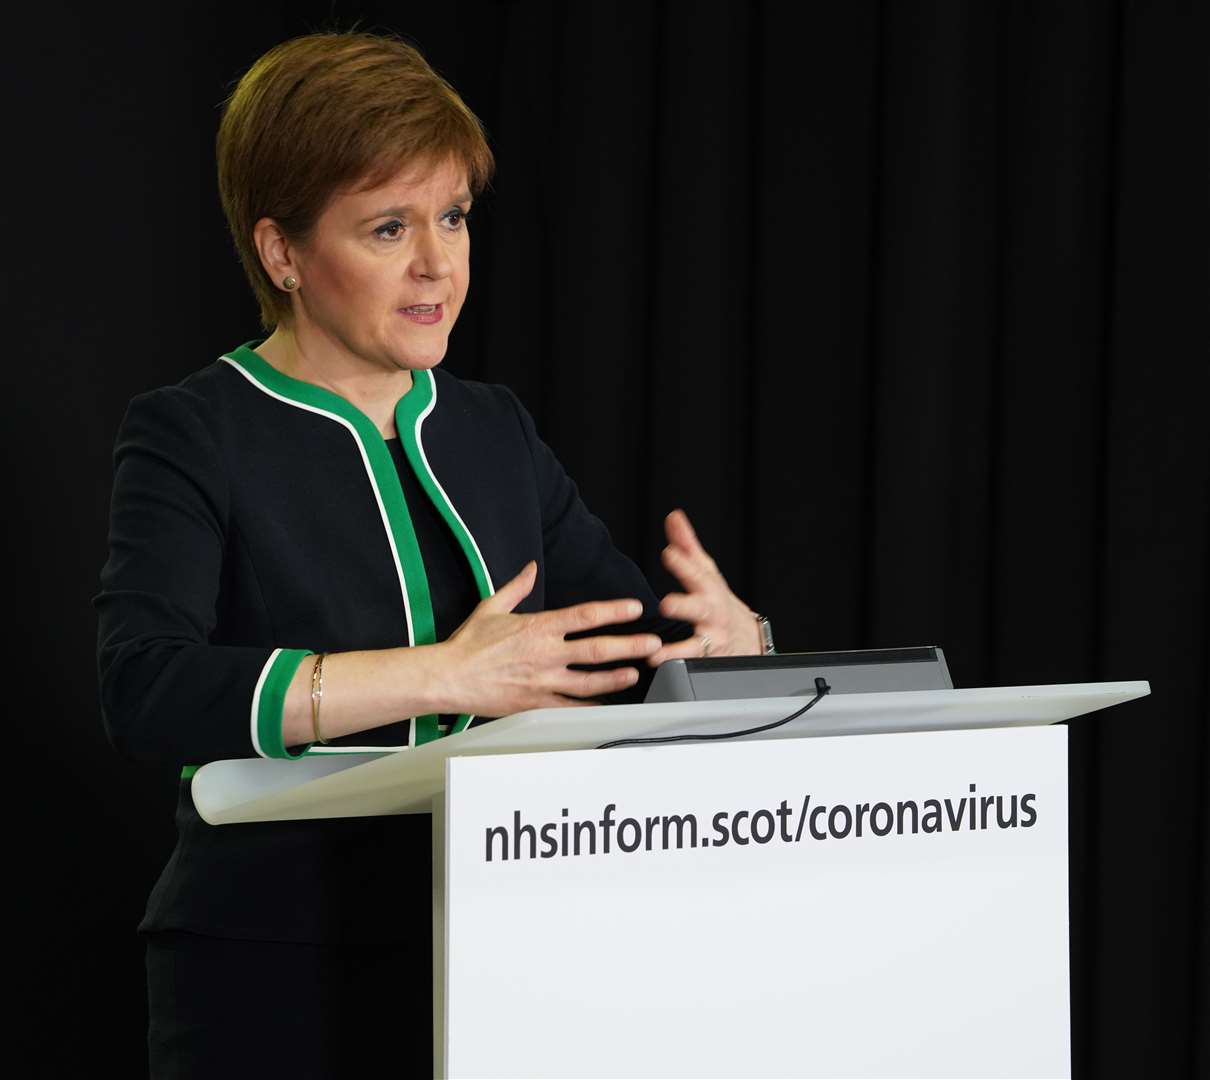 Nicola Sturgeon says social distancing and limiting of contact with others 'will be a fact of life for a long time to come'.